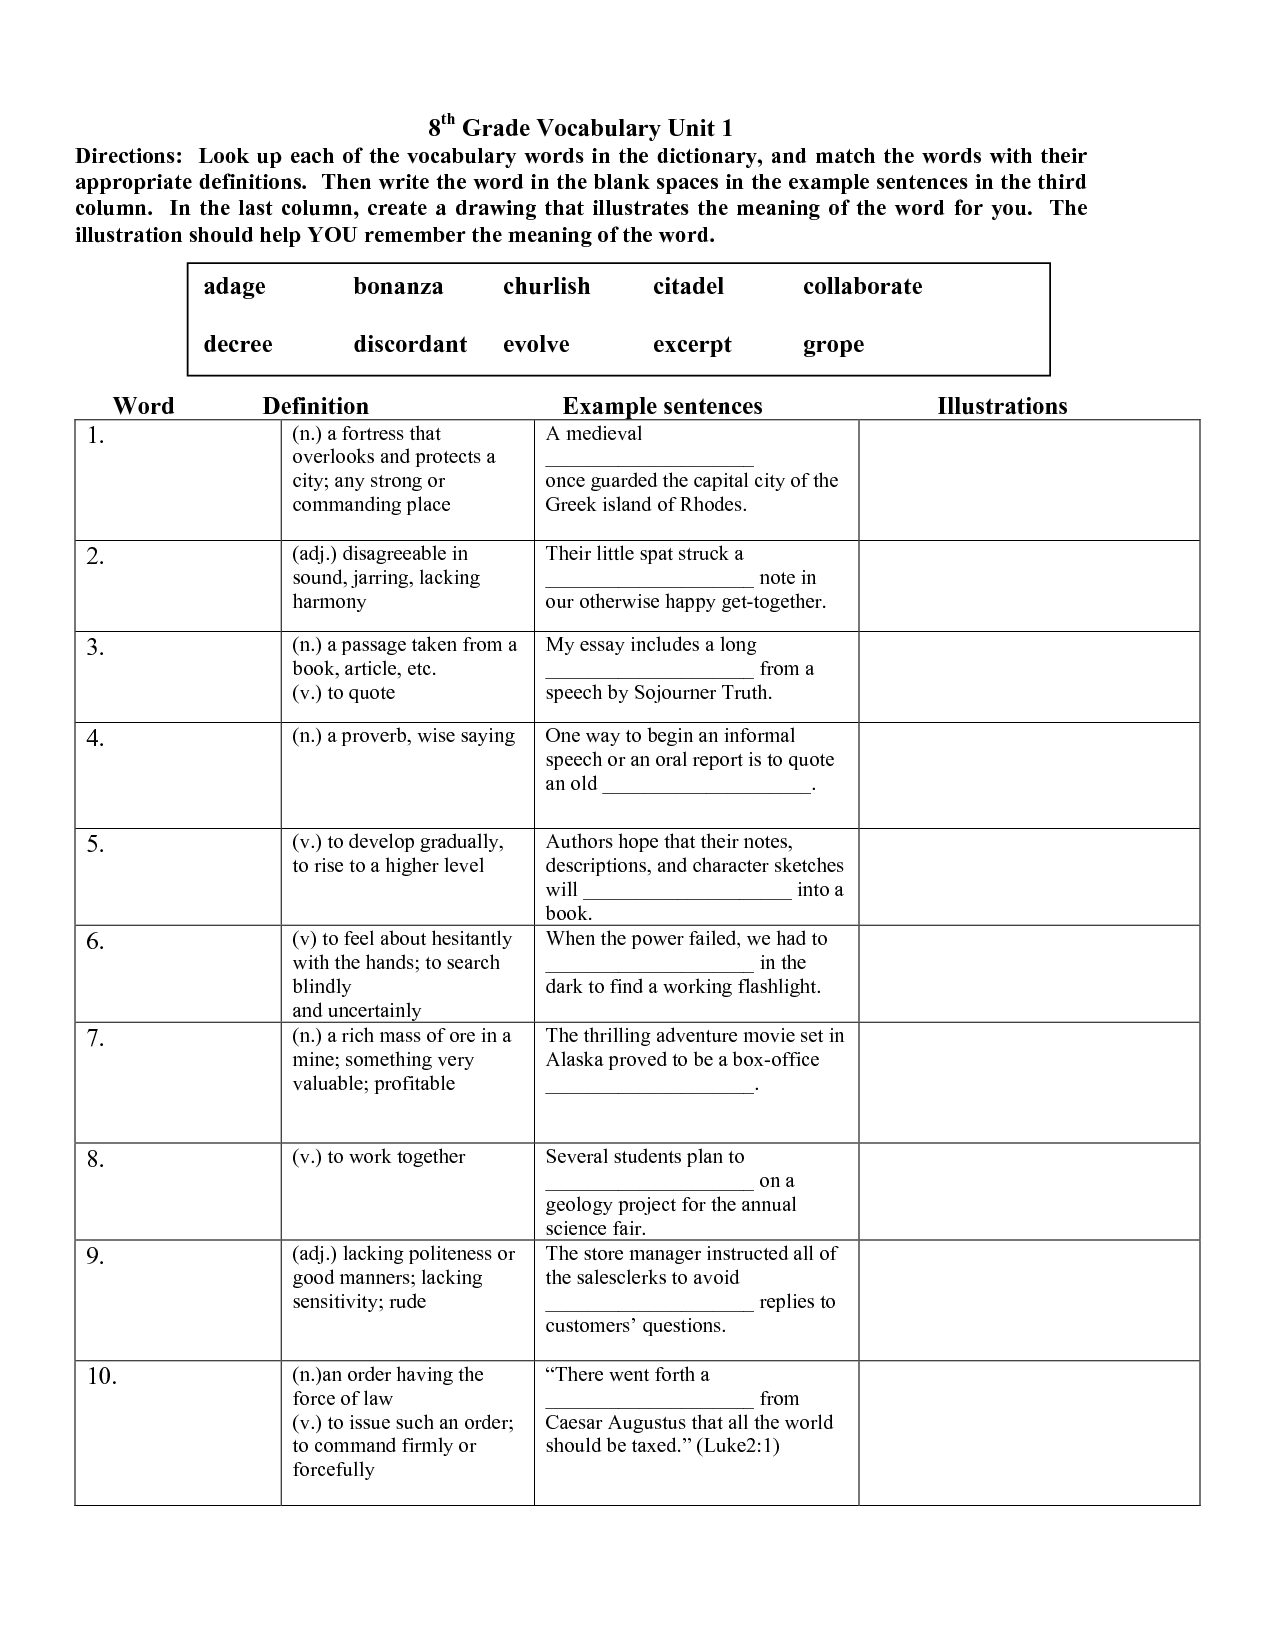 18-best-images-of-8th-grade-math-vocabulary-worksheets-8th-grade-math-worksheets-printable